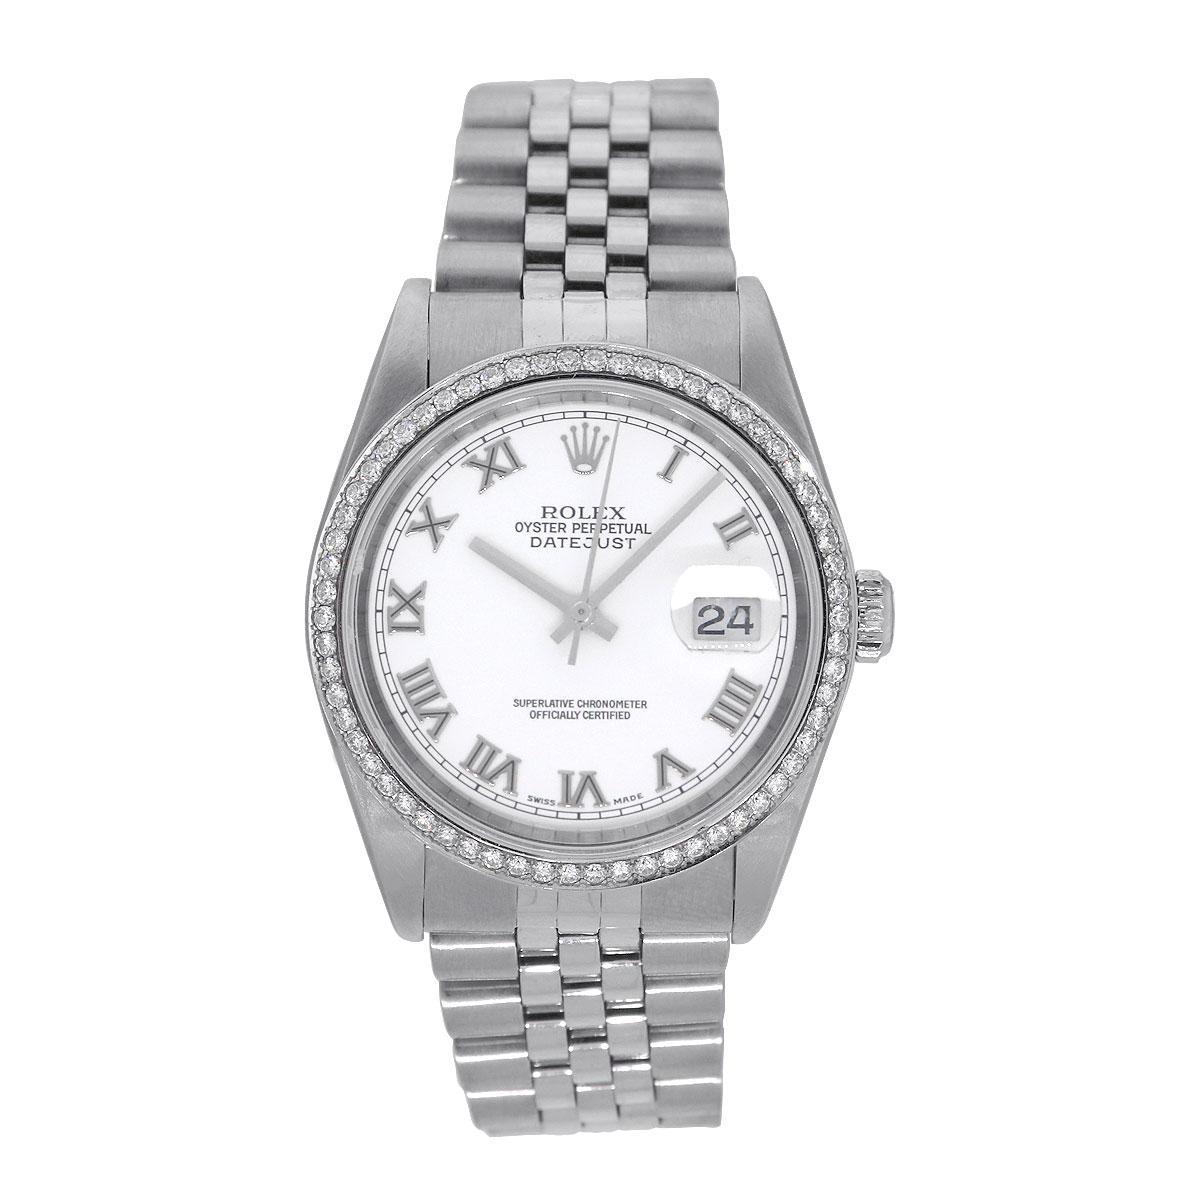 Brand: Rolex
MPN: 16234
Model: Datejust
Case Material: Stainless Steel
Case Diameter: 36mm
Crystal: Sapphire Crystal
Bezel: Aftermarket Diamond bezel
Dial: White dial with silver stick hands and silver roman numerals. Date can be found at 3